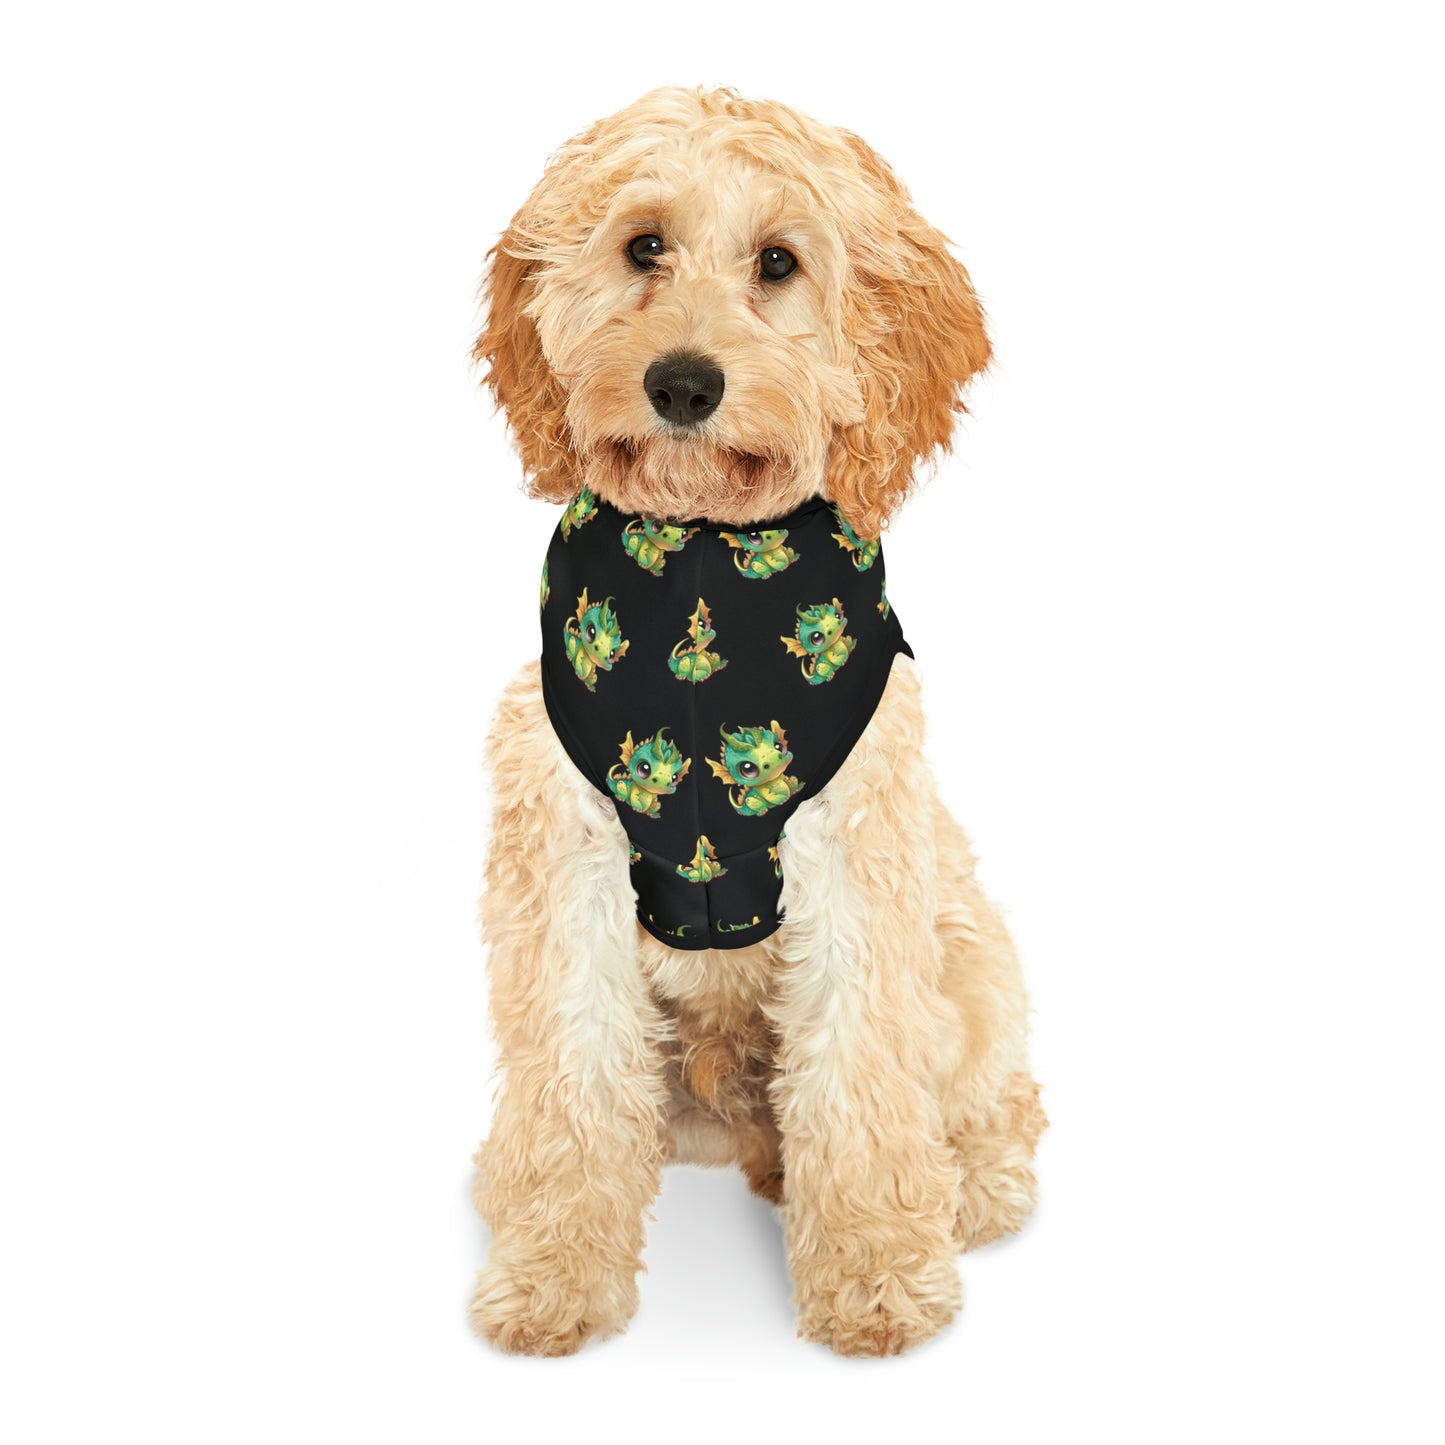 Baby Dragon Bobby is all over this cute black hooded dog or cat coat - for cool climates 